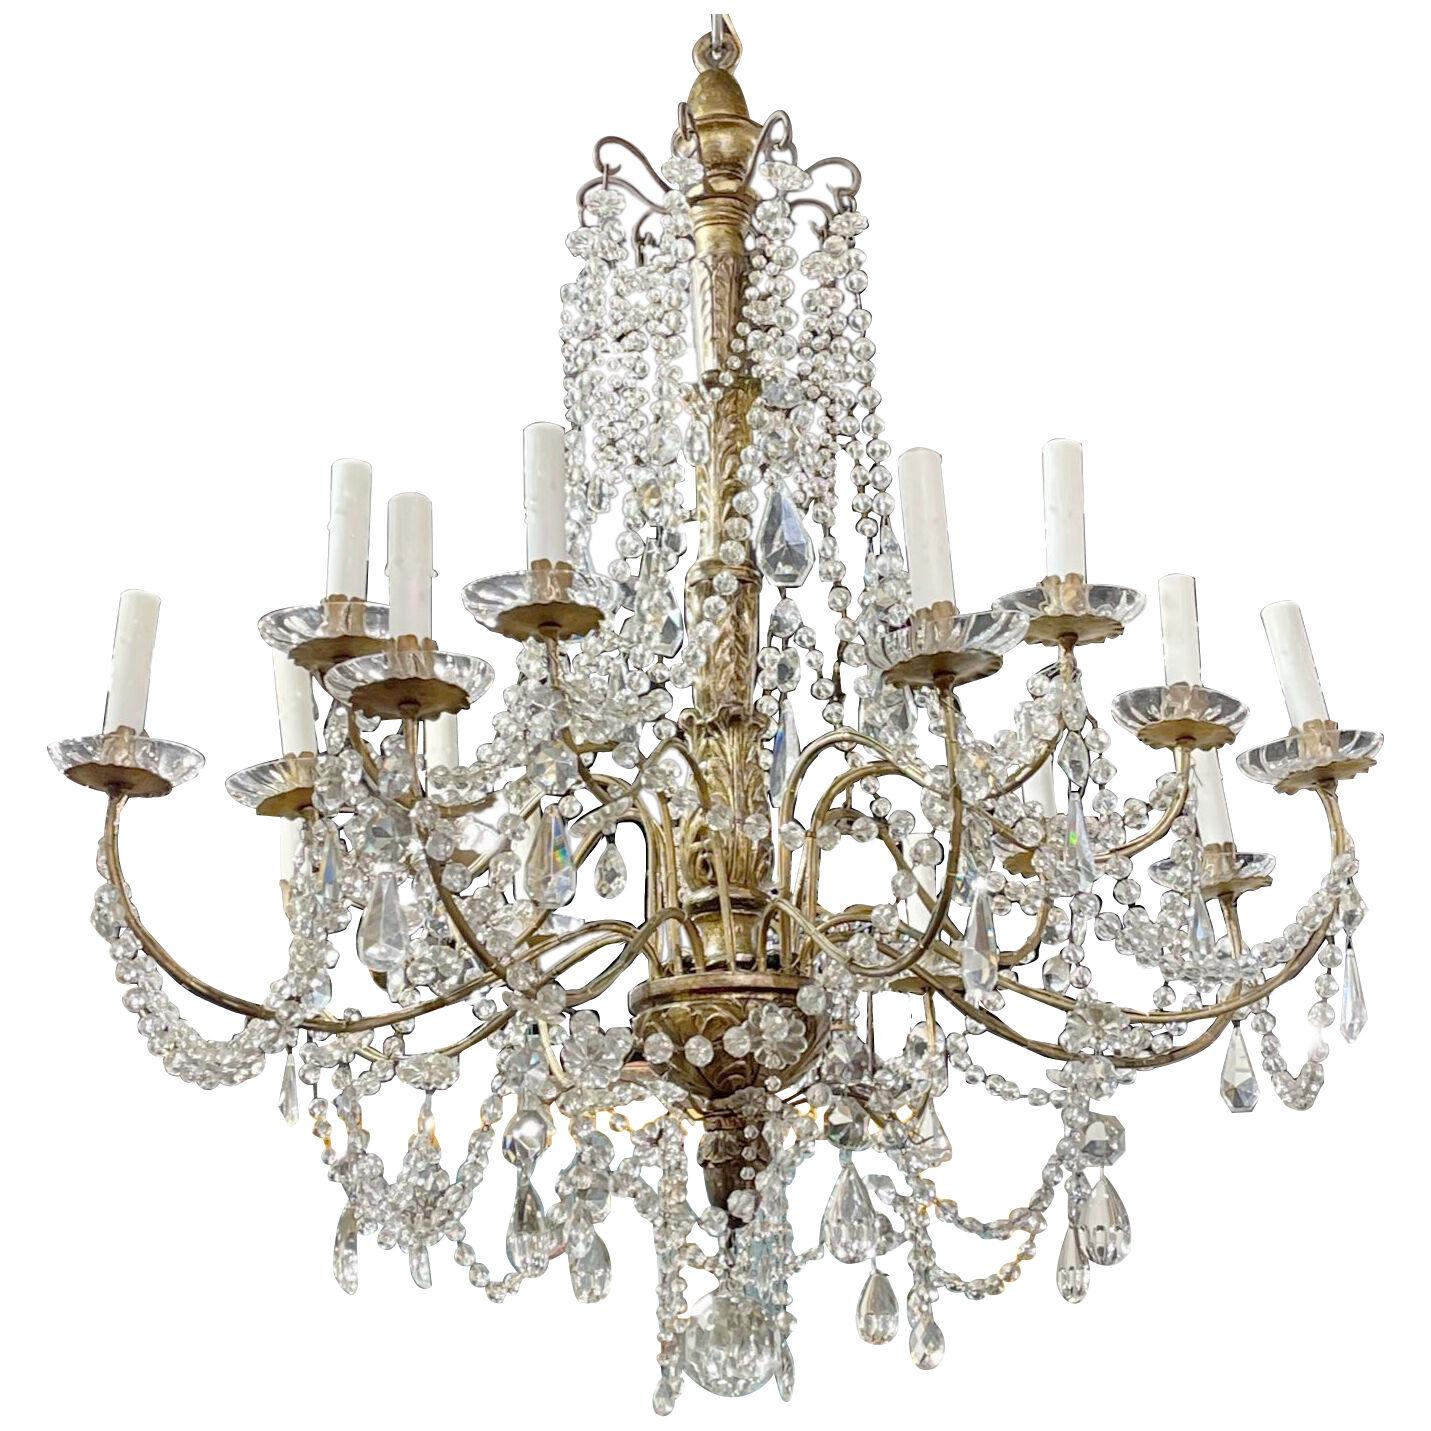 19th Century Italian Giltwood and Crystal Chandelier